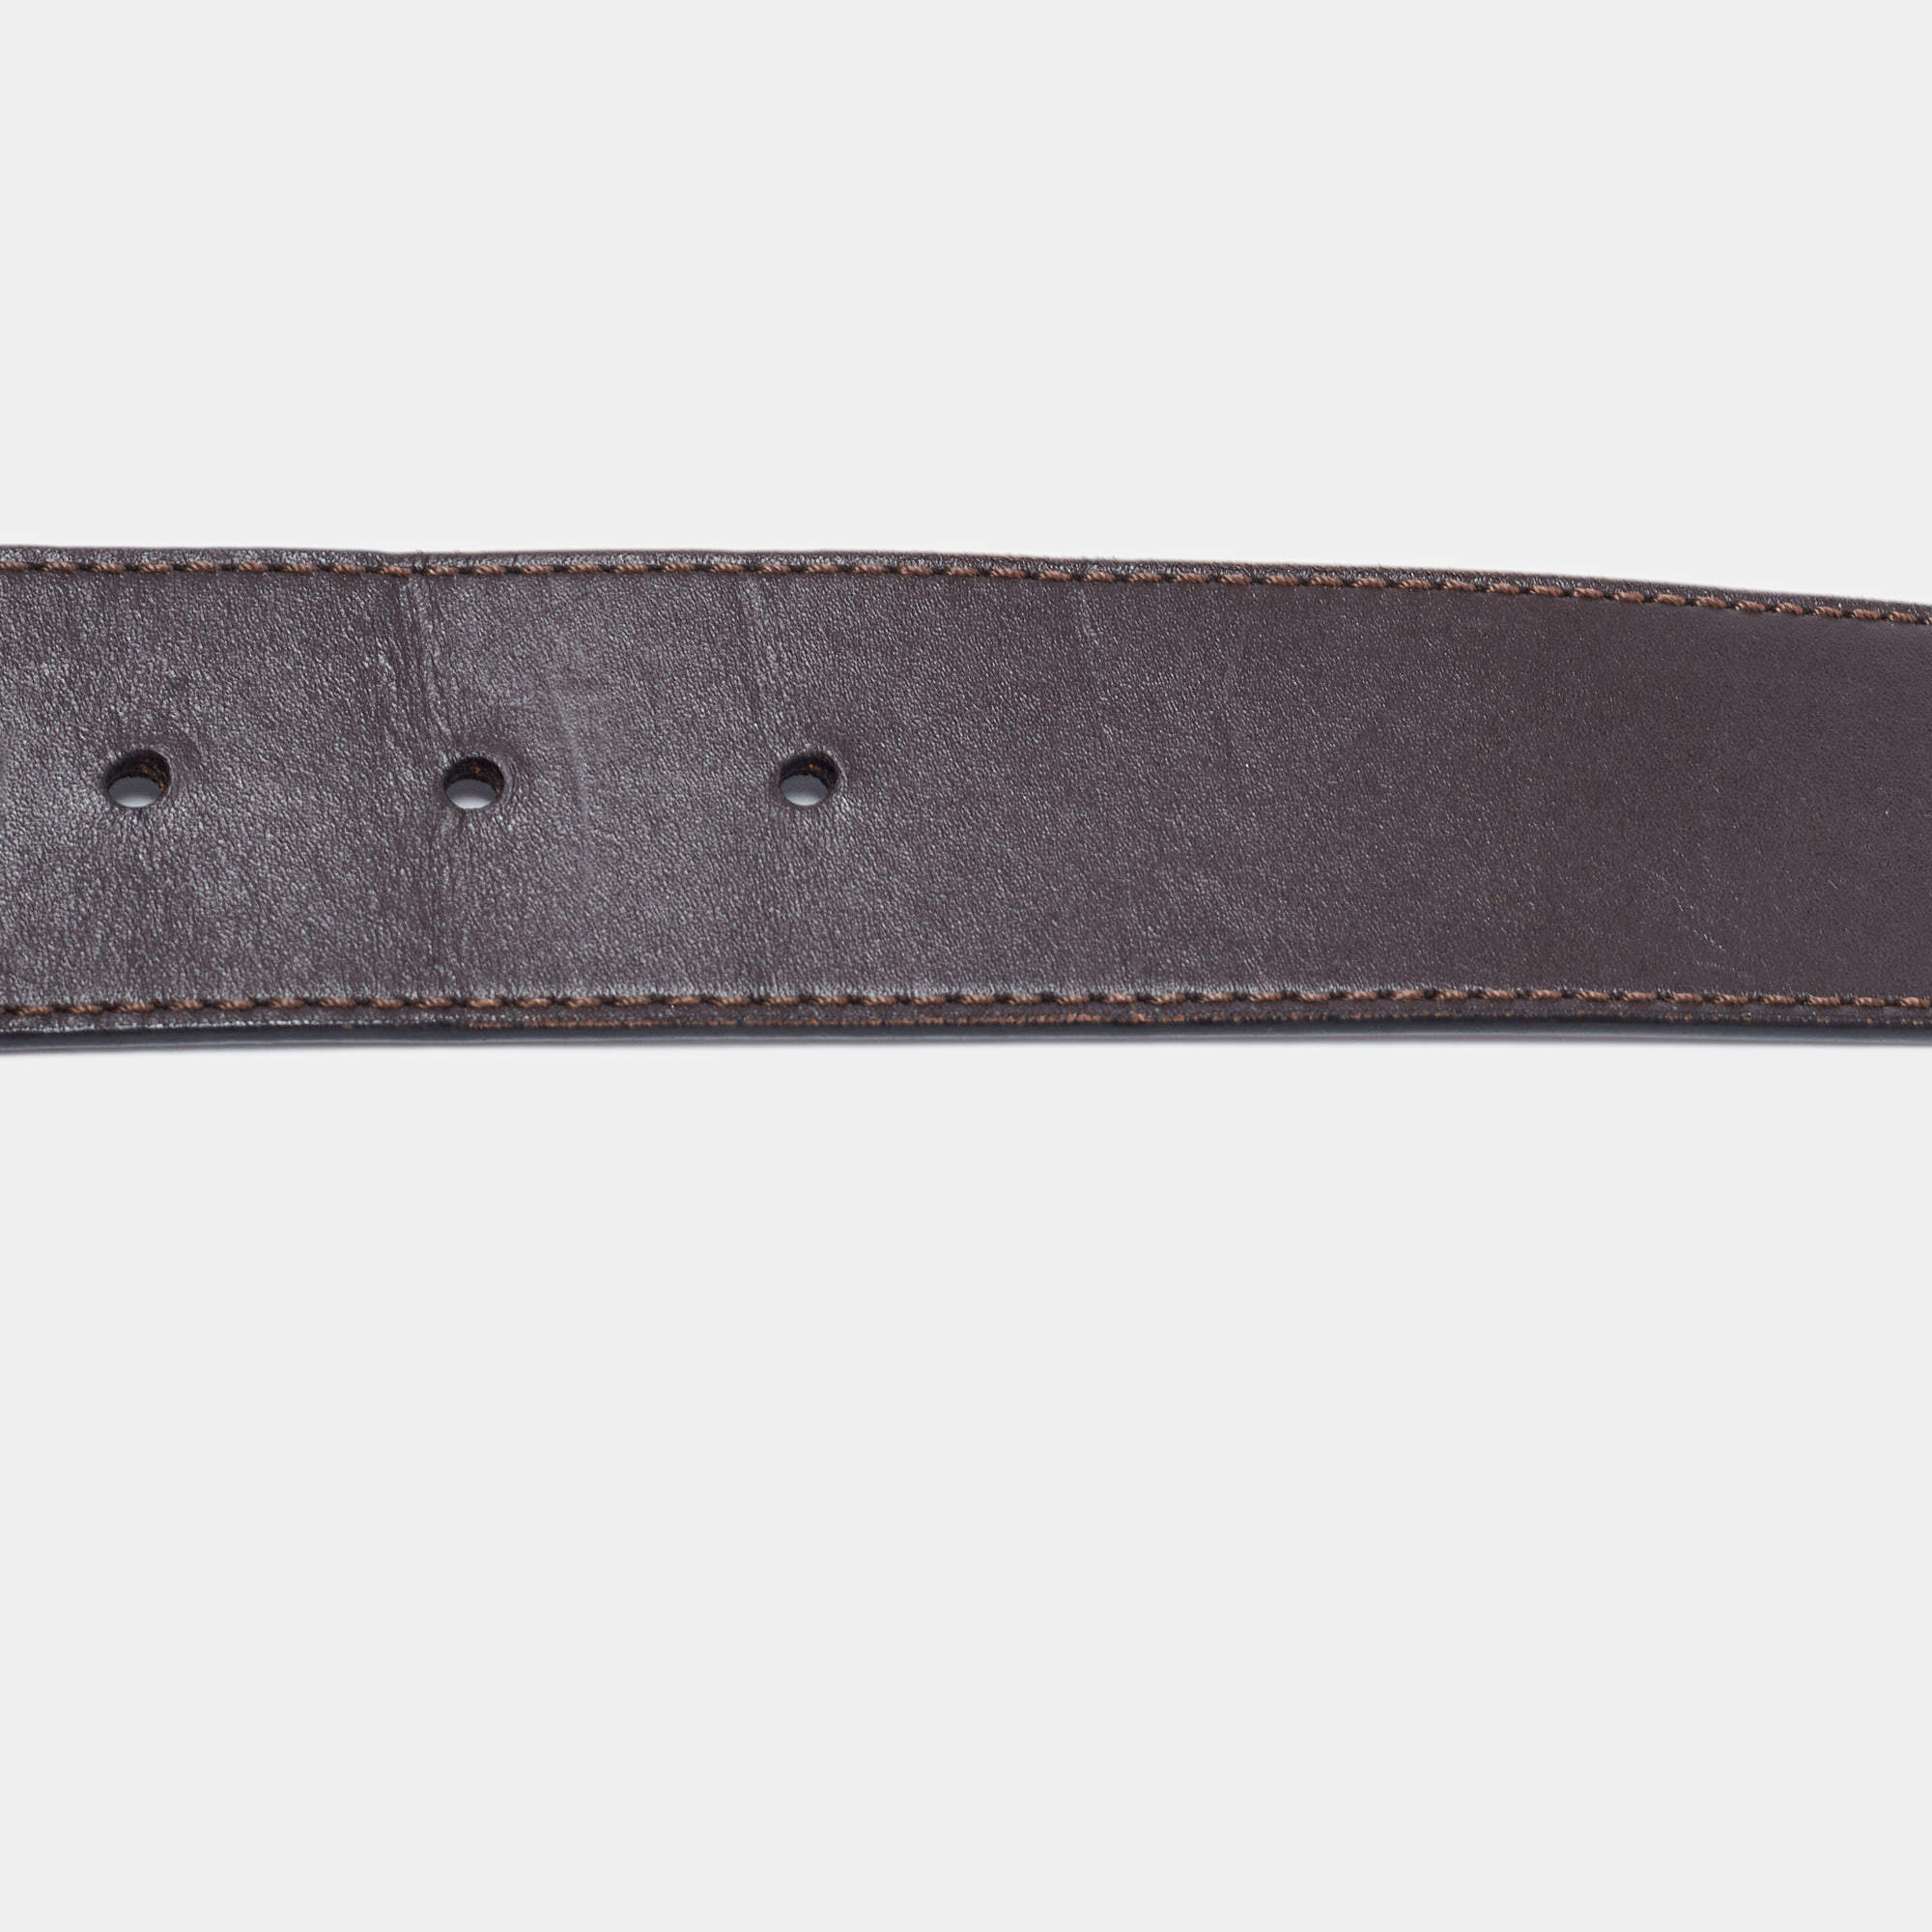 Louis Vuitton 90cm Black Patent Leather Belt with Key and Lock Charm  (CA1027) - The Attic Place